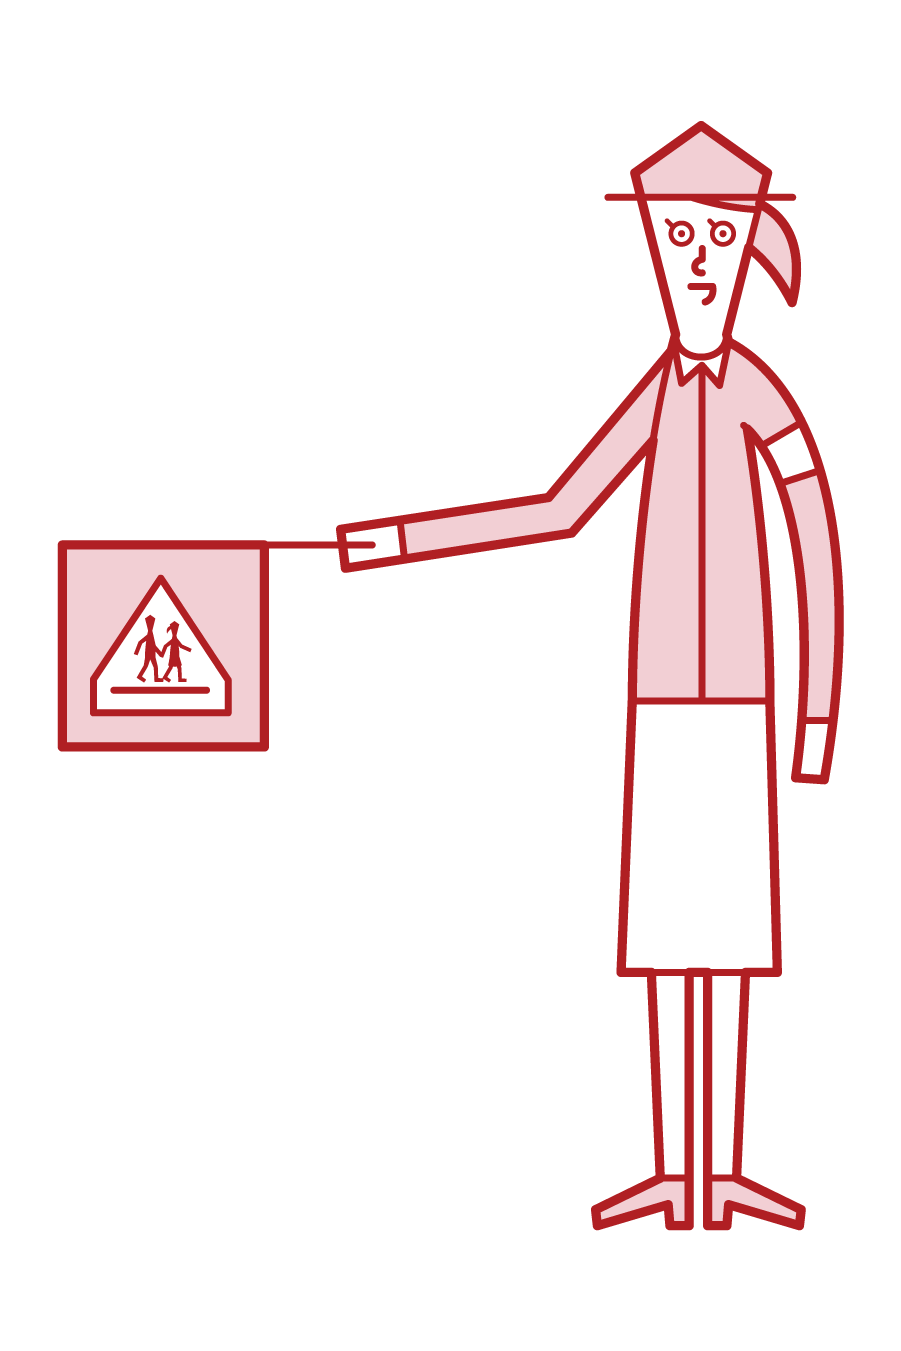 Illustration of a school child defender (woman) wearing a green hat and clothes